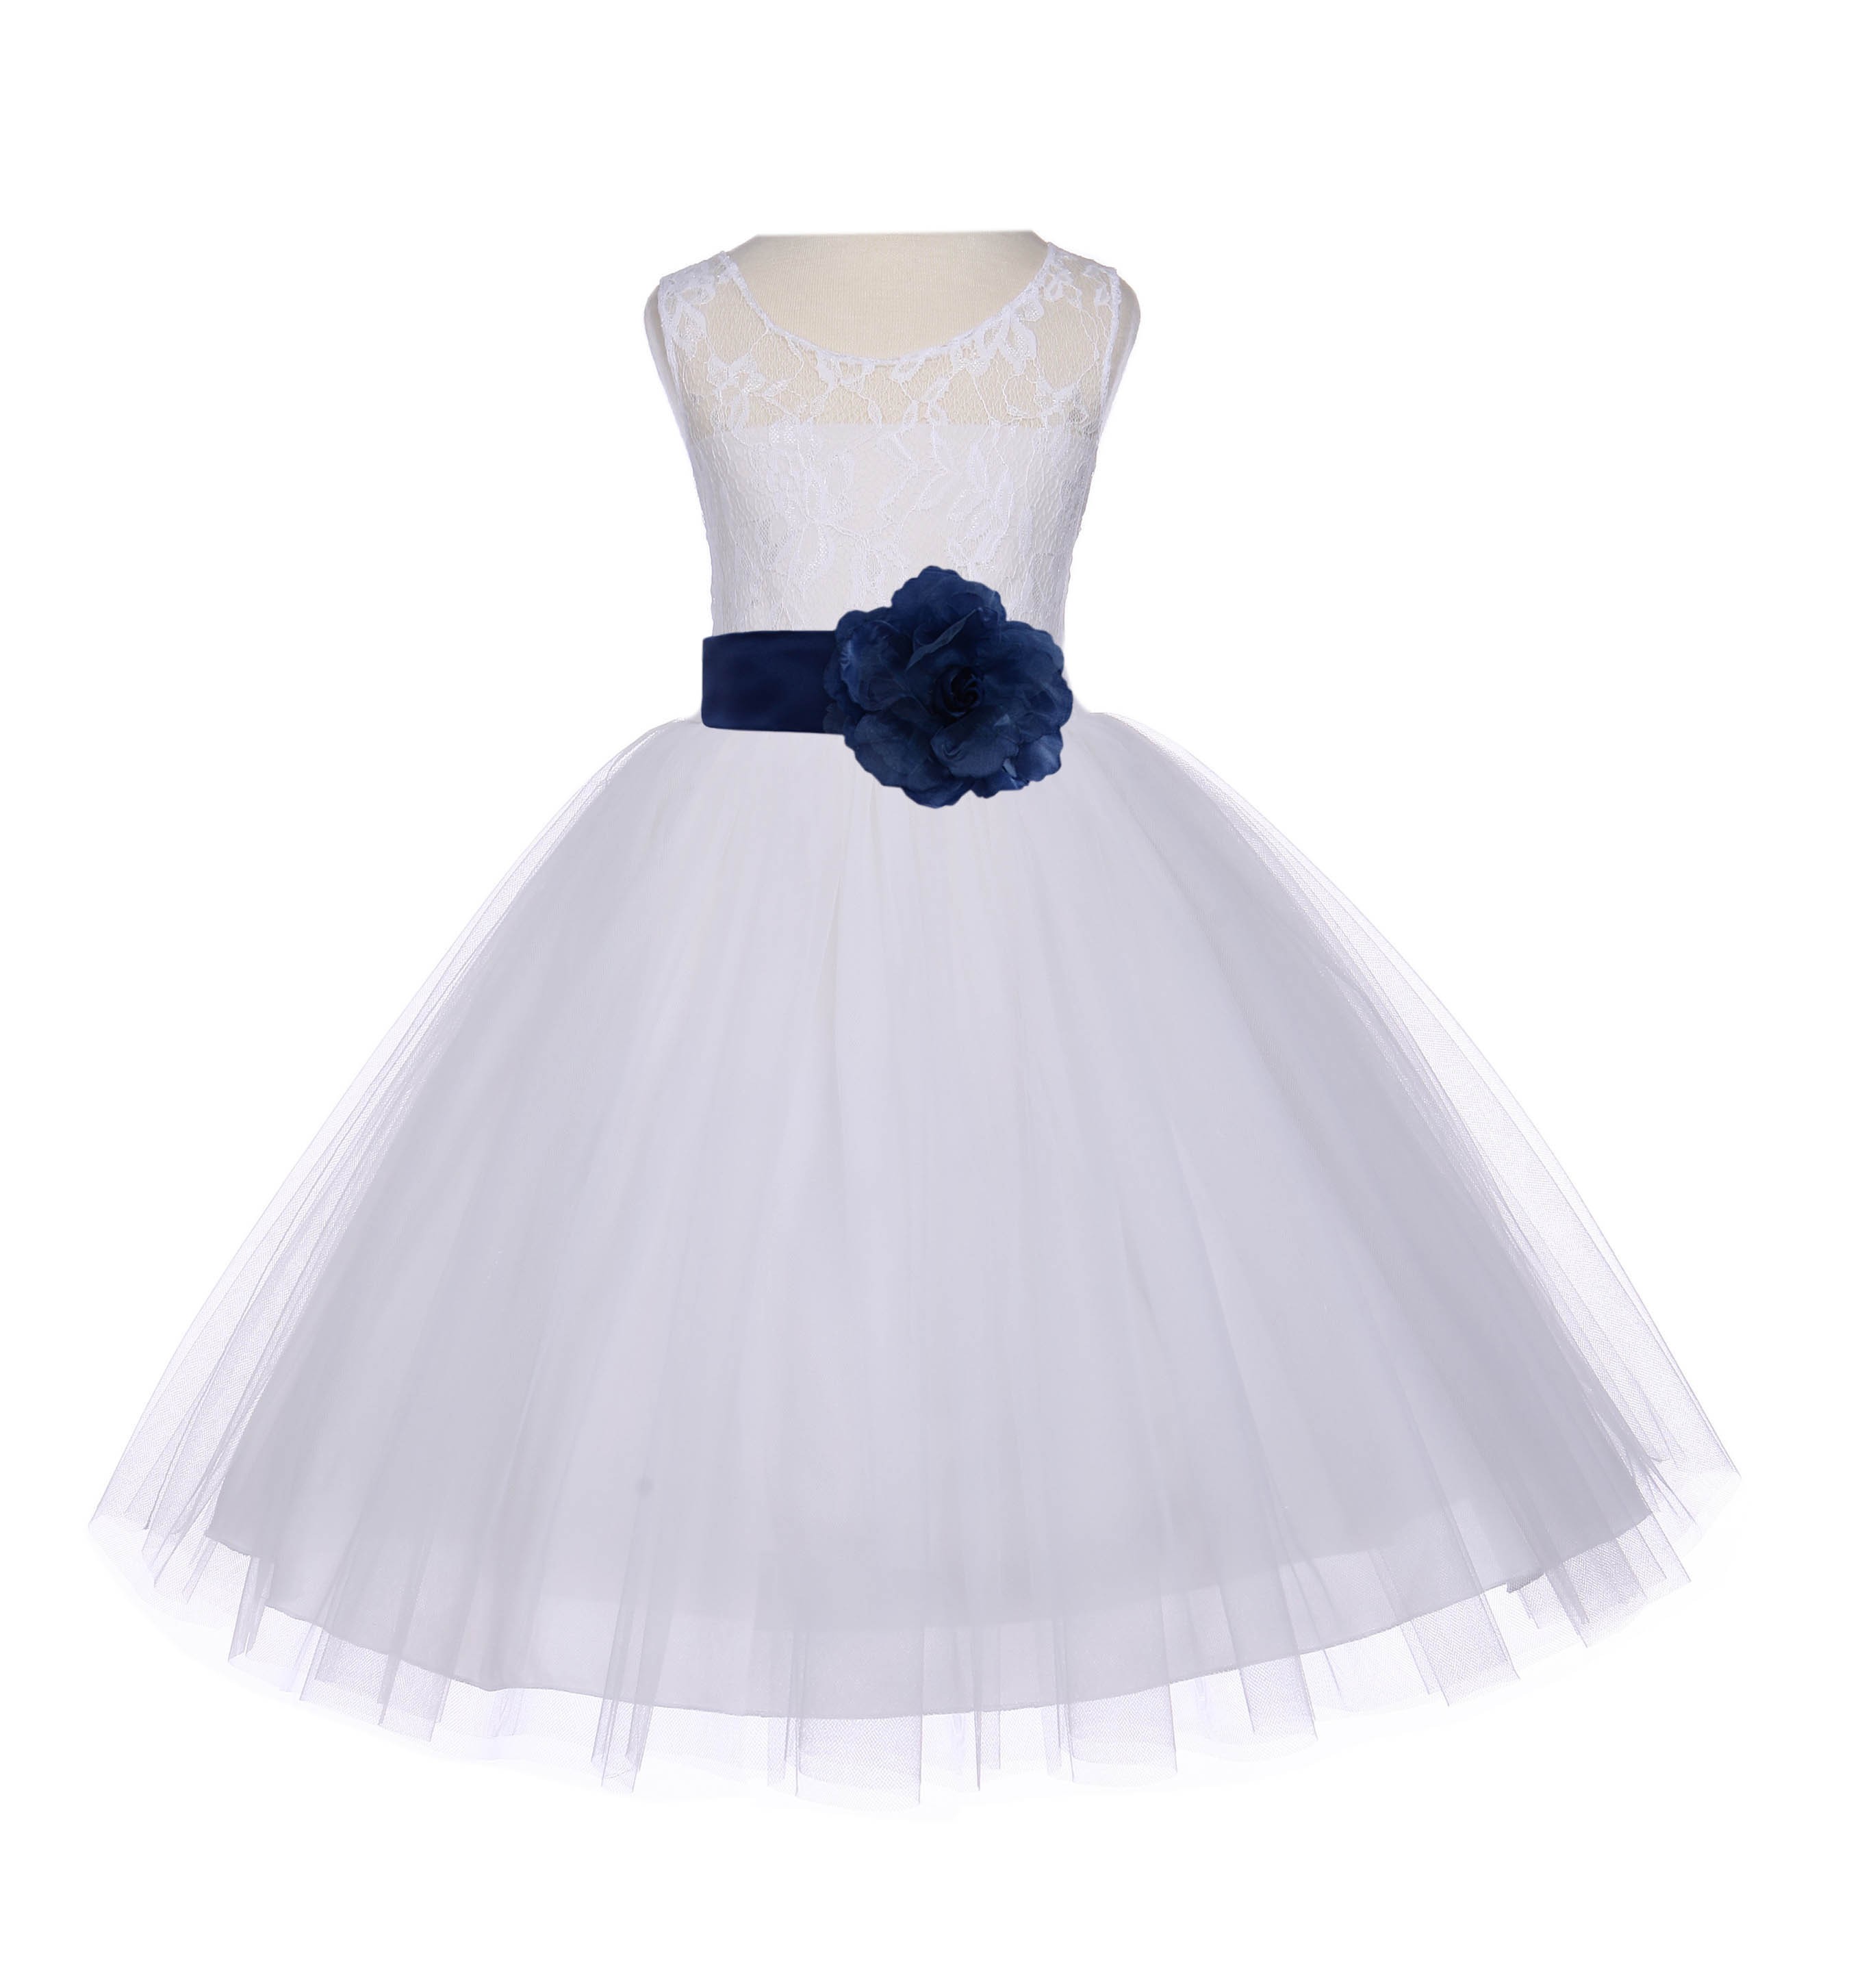 Ivory/Navy Floral Lace Bodice Tulle Flower Girl Dress Bridesmaid 153S